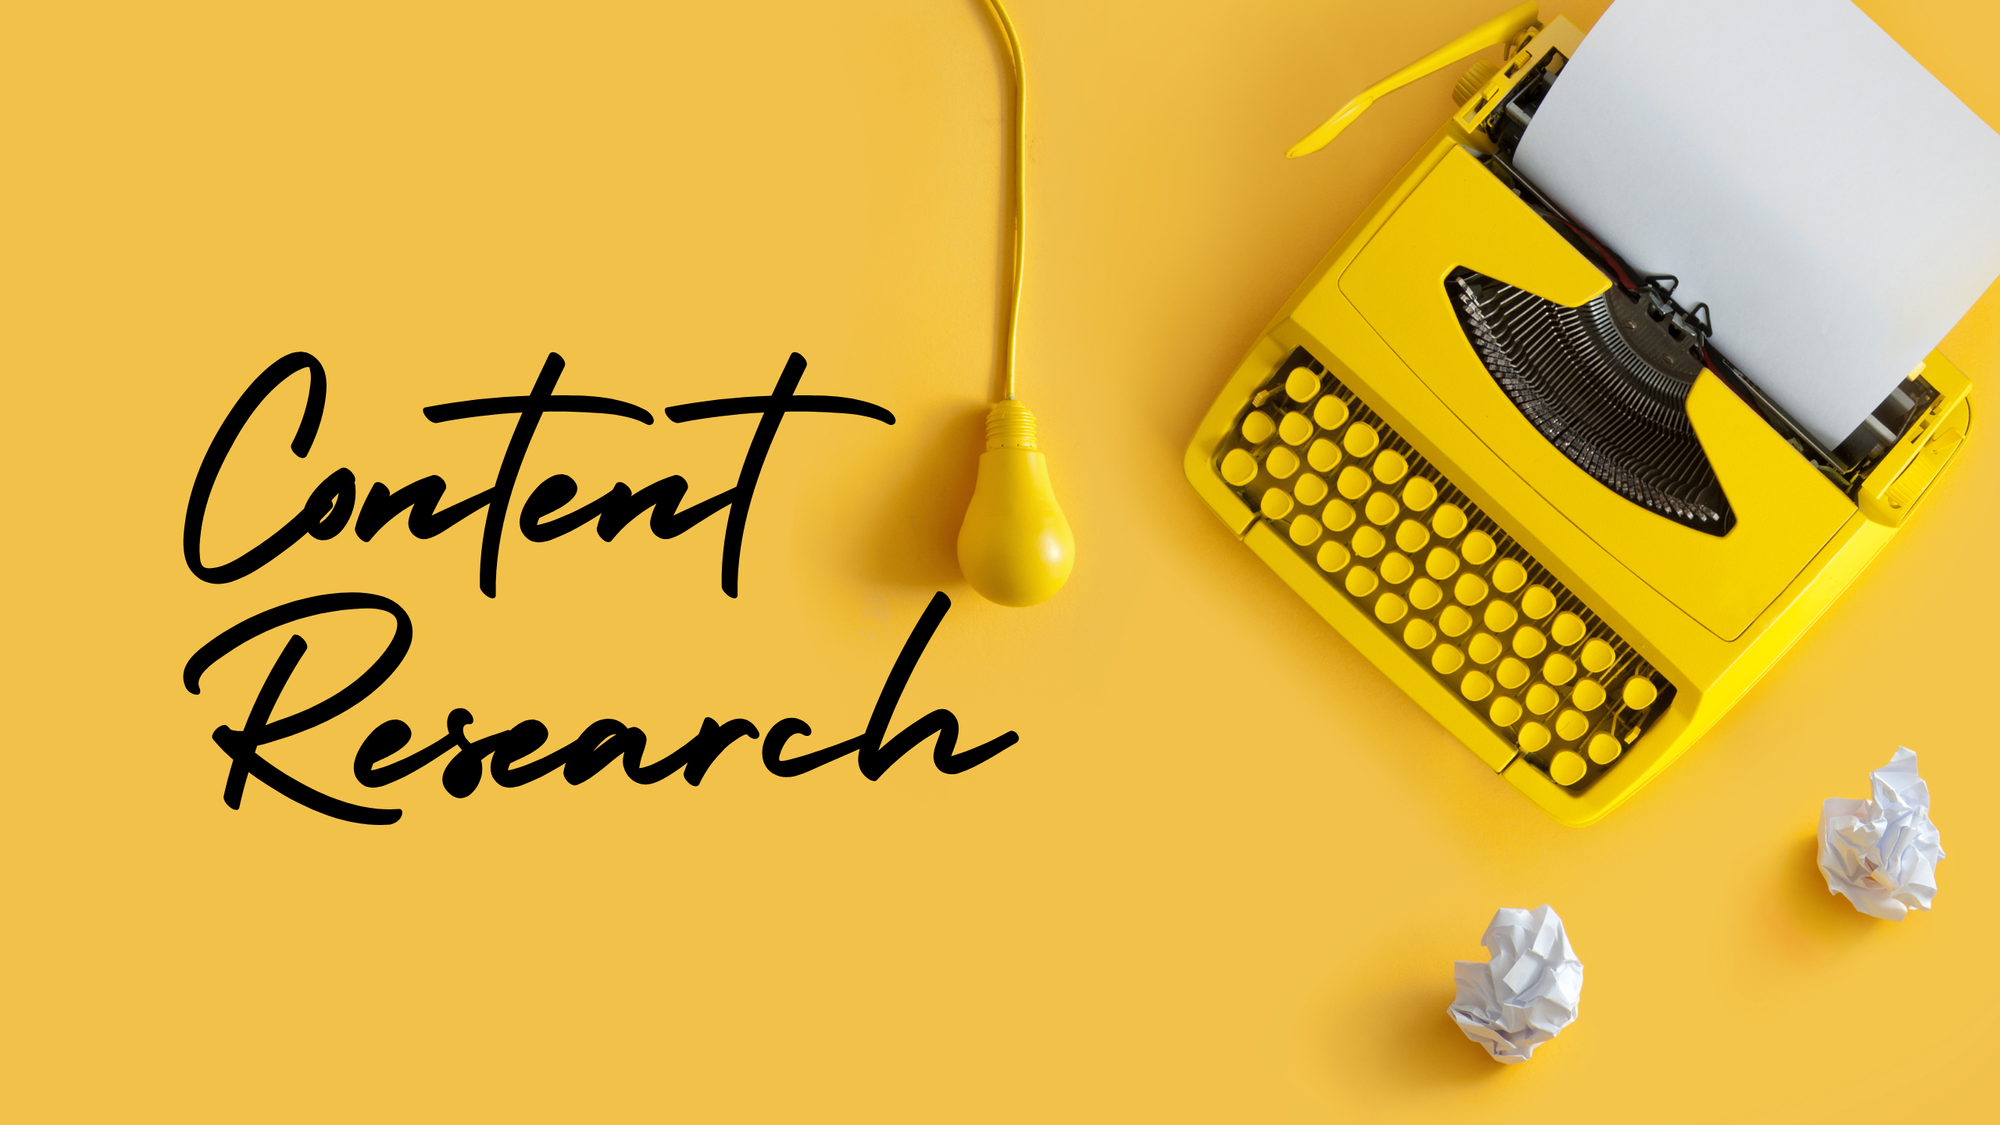 Creating quality content - How to establish credibility through content research?